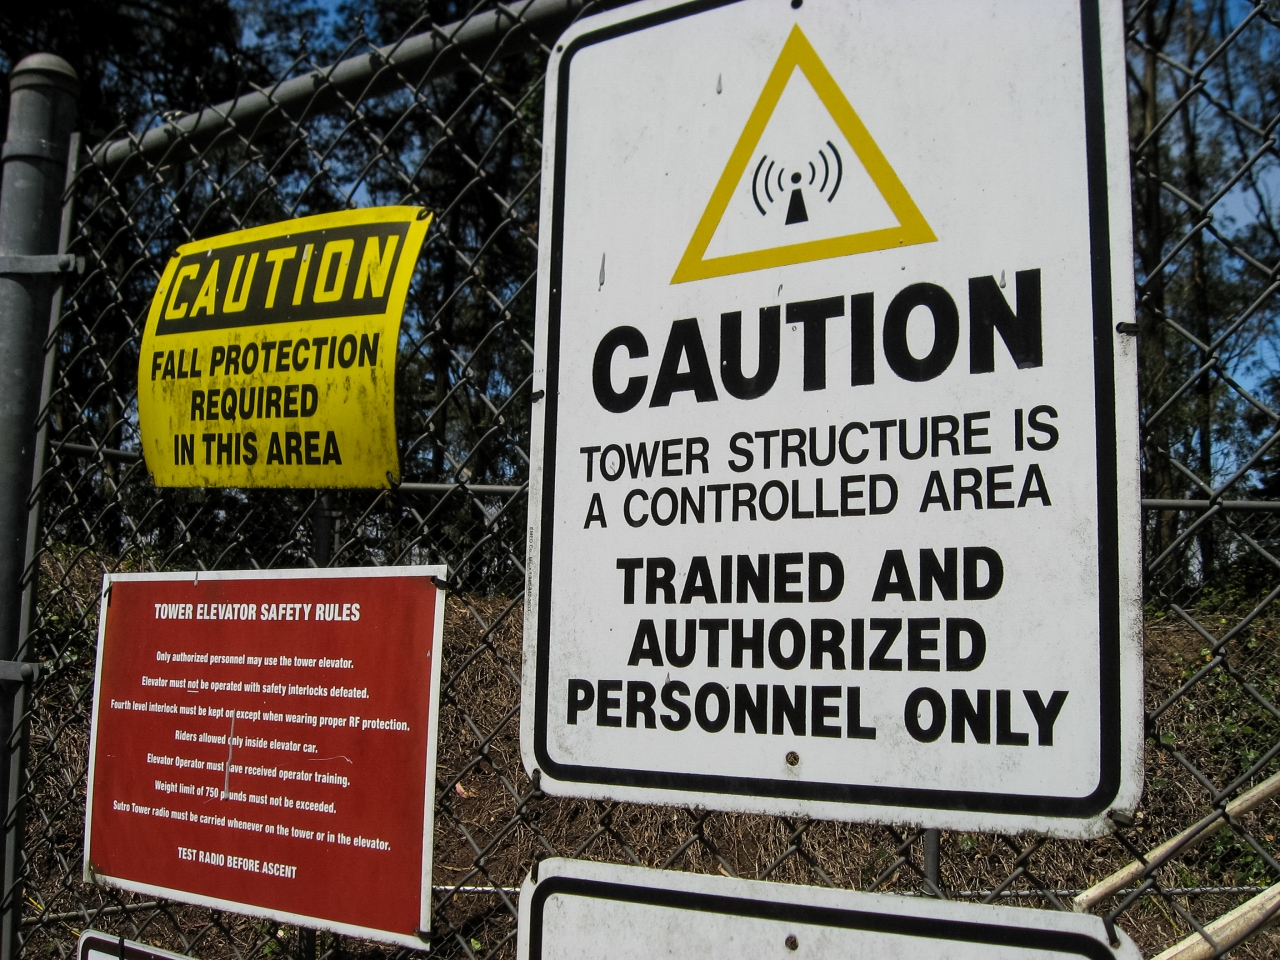 Fall Protection, Authorized Personnel Only and Tower Elevator Safety Rules signs just outside the Sutro Tower western leg and elevator.